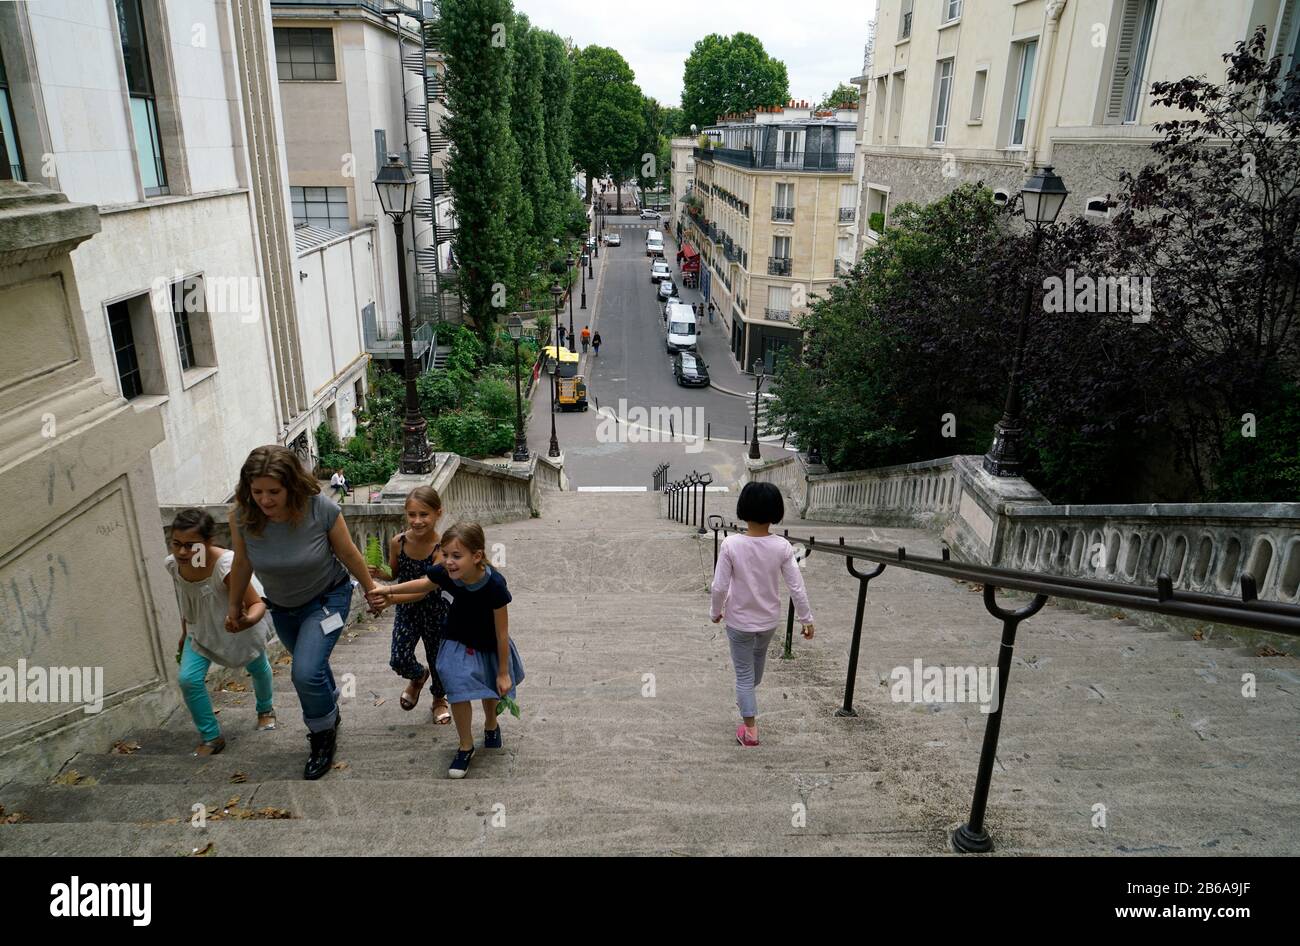 Adult and children walking on the steep Rue de la Manutention connecting River Seine and Avenue du President Wilson in 16th arrondissement.Paris.France Stock Photo